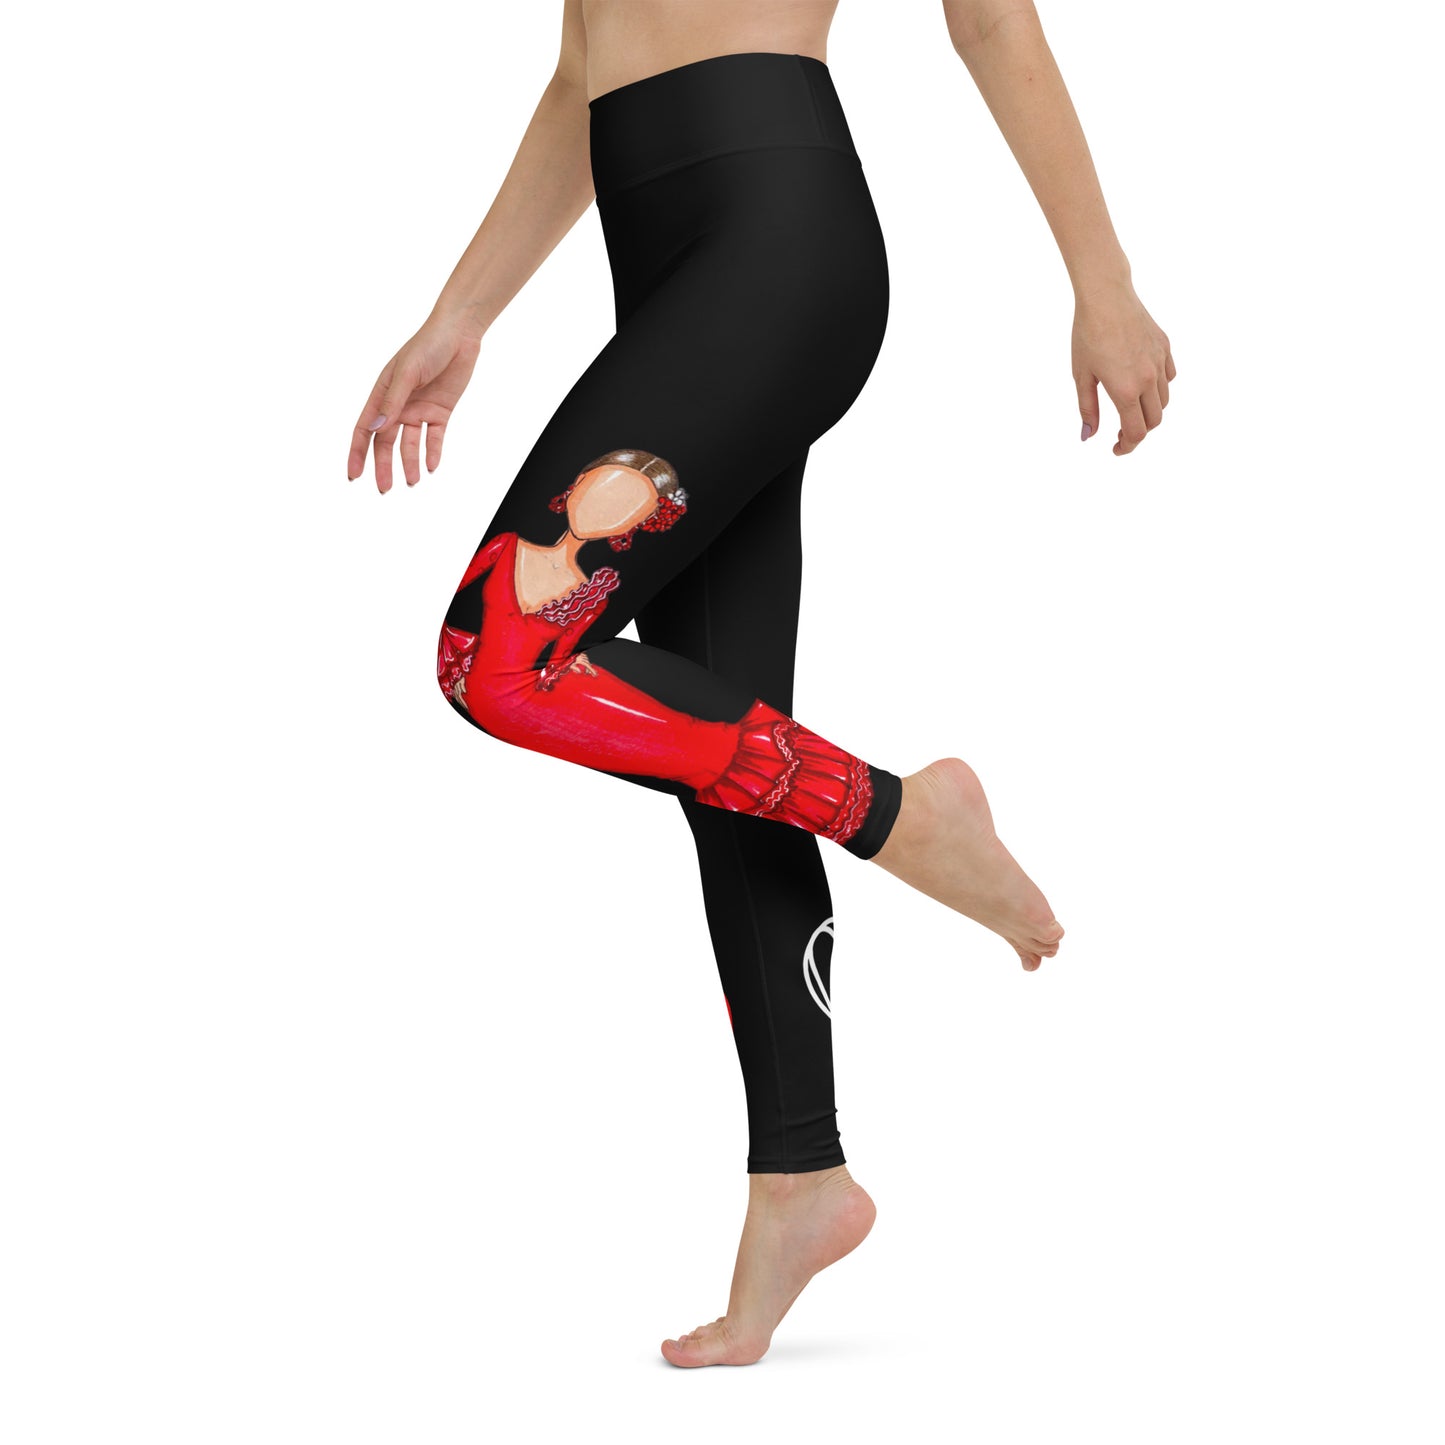 Flamenco Dancer Leggings, black  high waisted yoga leggings with a red dress design and white and red hearts. - IllustrArte